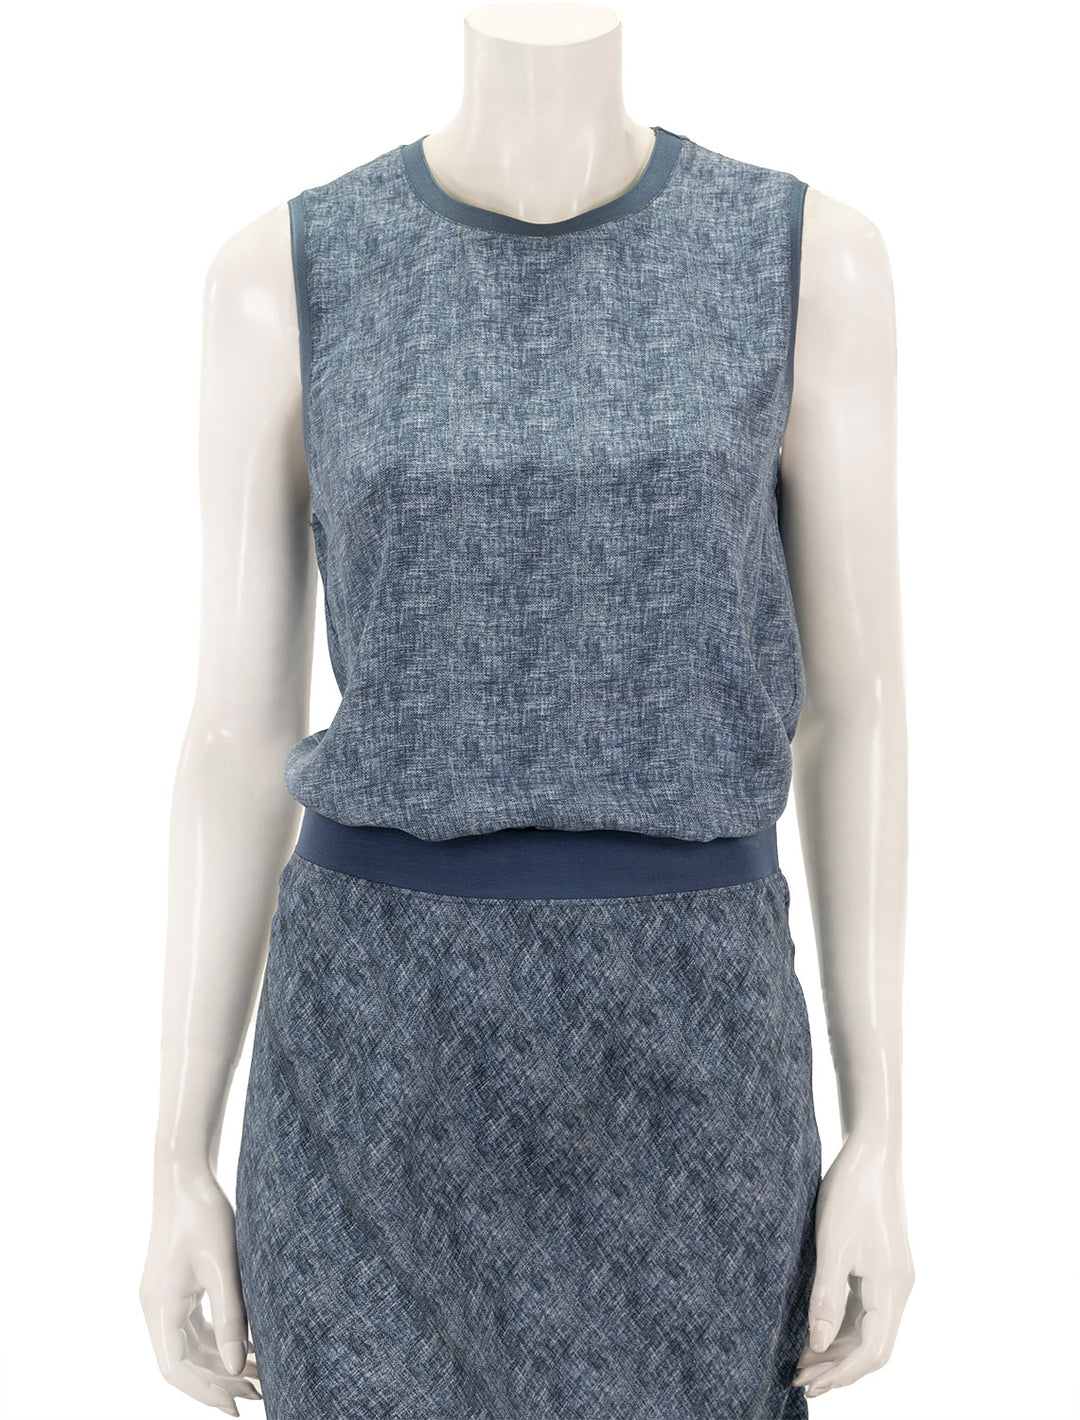 Front view of ATM's sleeveless muscle tee in naval blue combo.